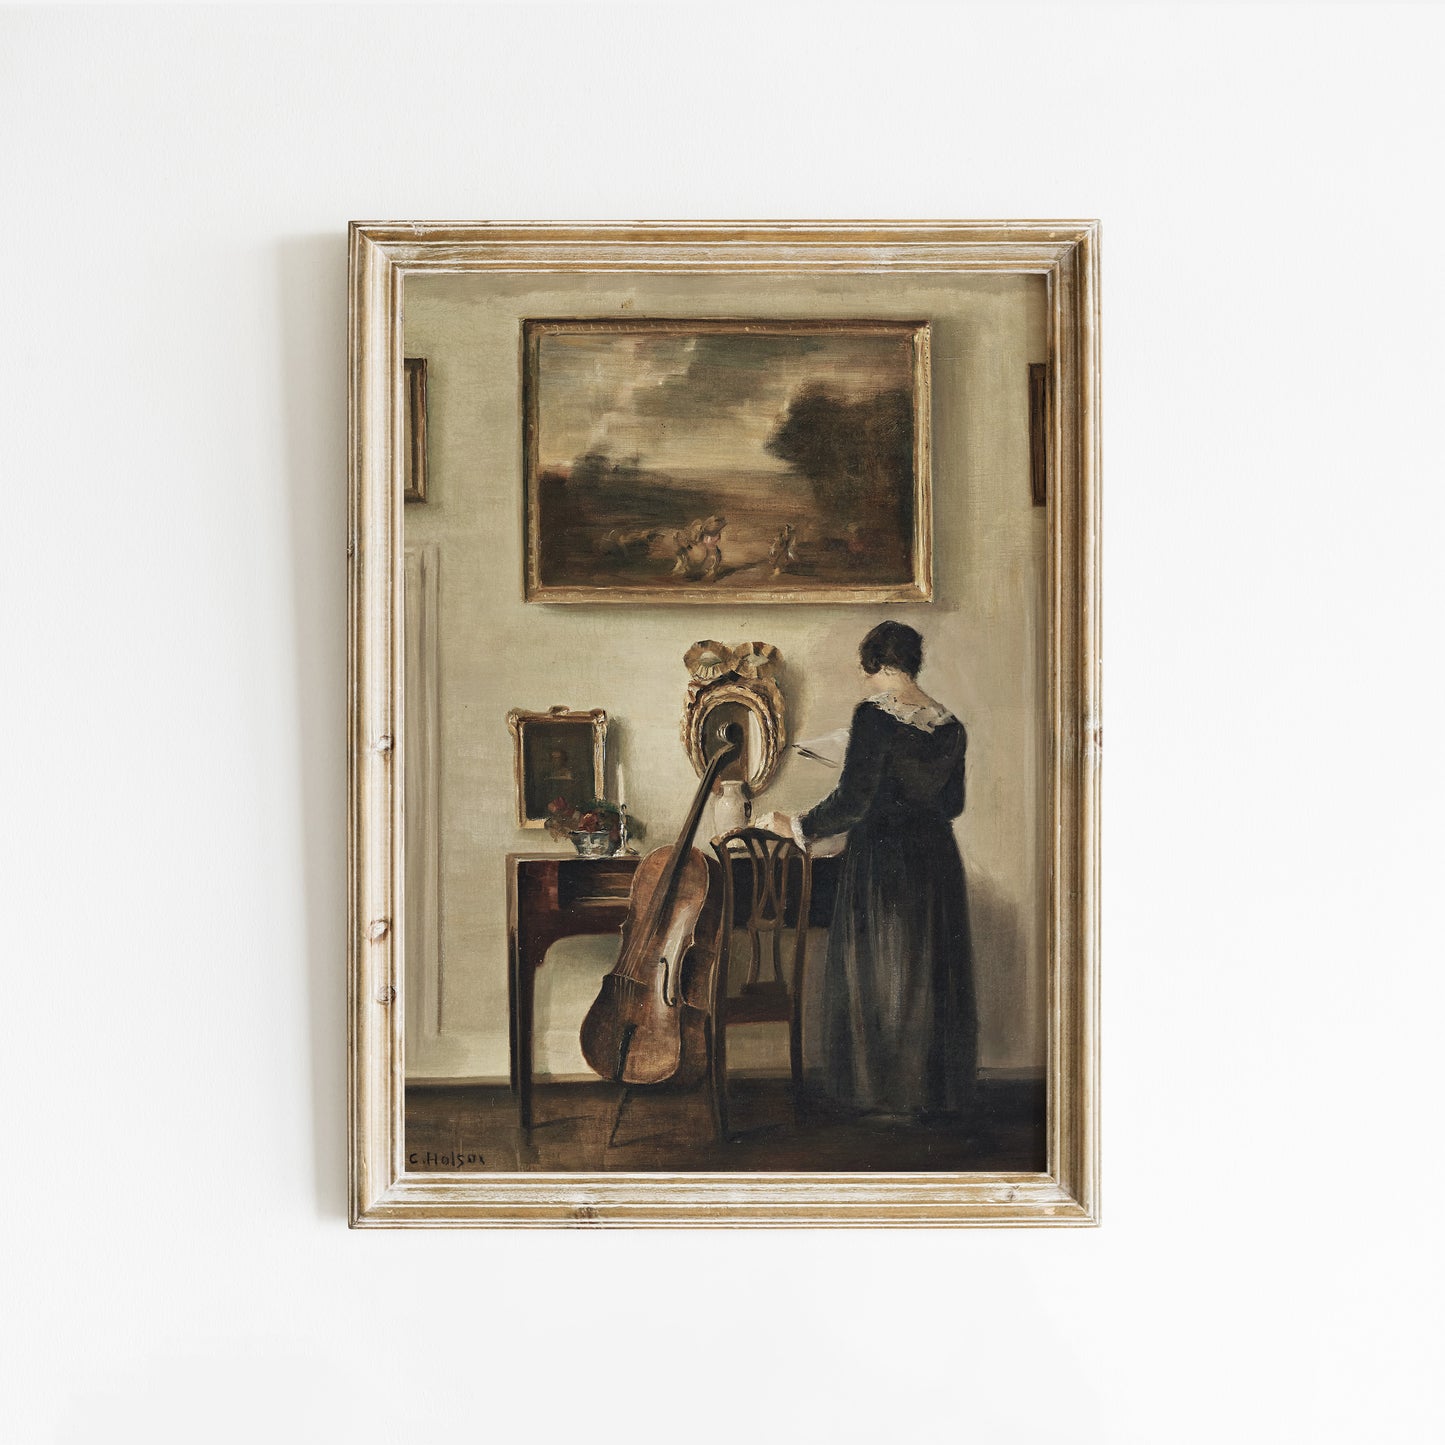 Woman And Cello Vintage Art 003: Digital Download